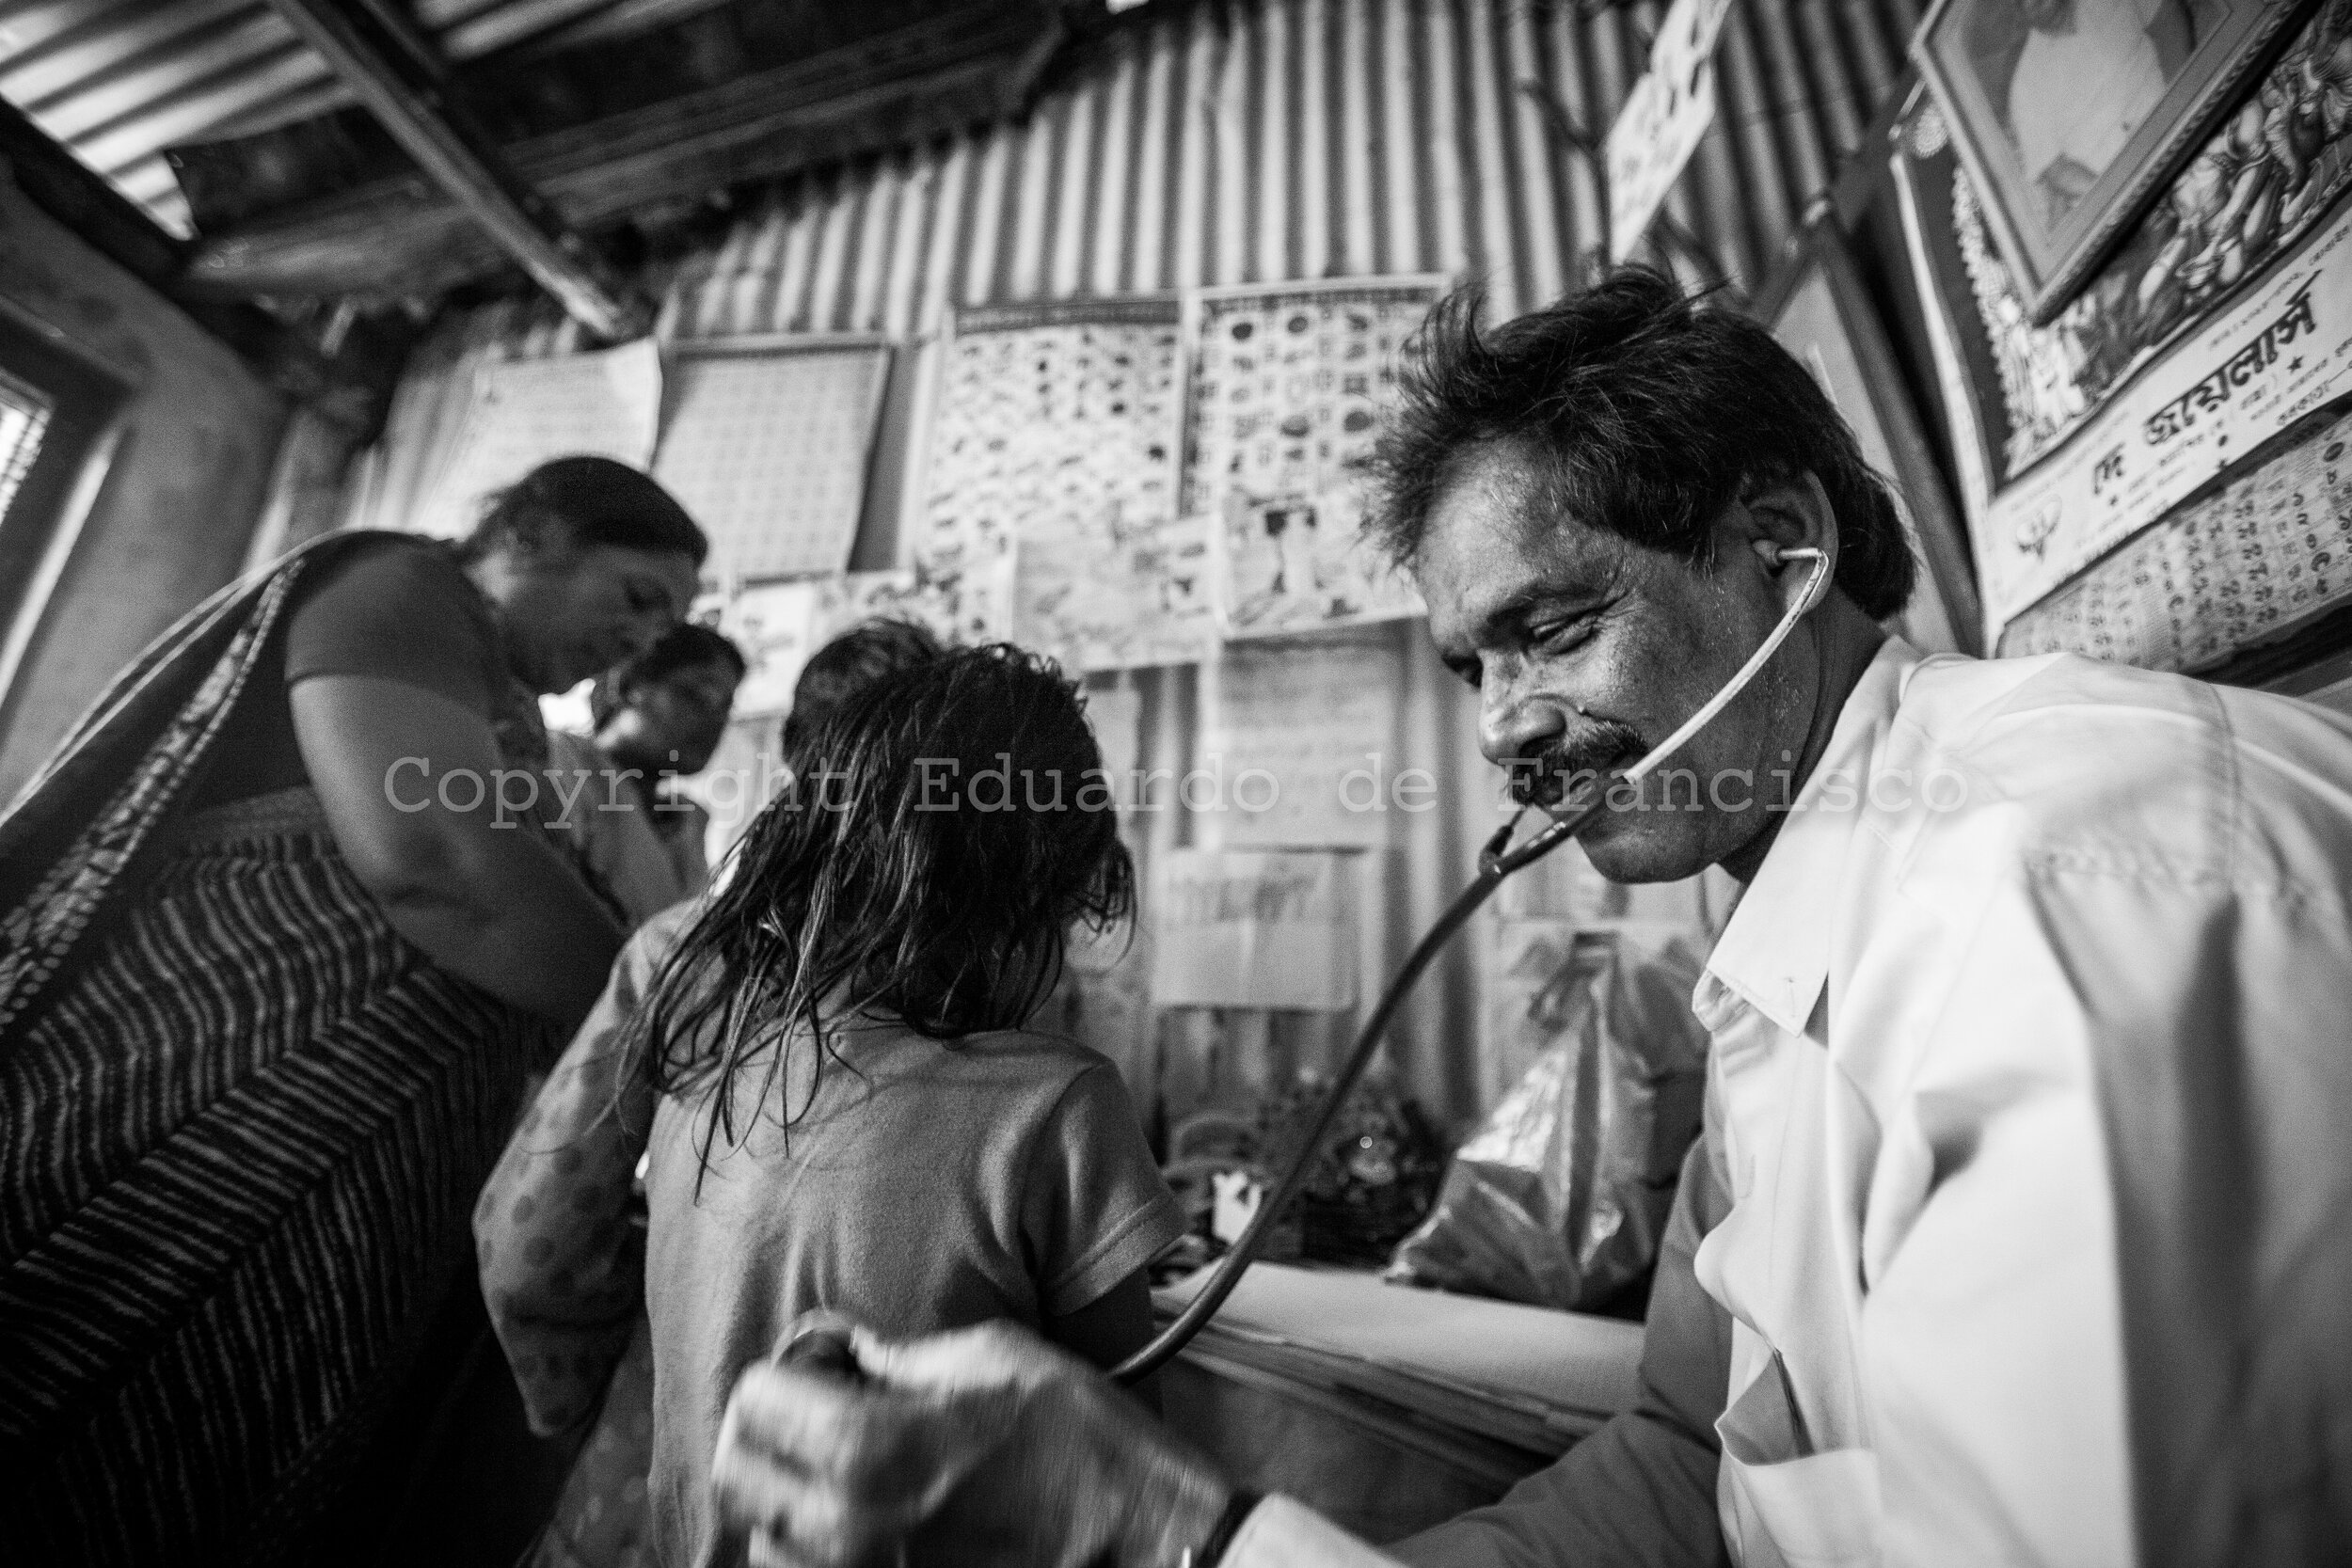  Weekly medical check-up in the center of Kumartuli, part of the integrated programs (education, food, medical assistance) partly funded by the government of the state of West Bengal. 